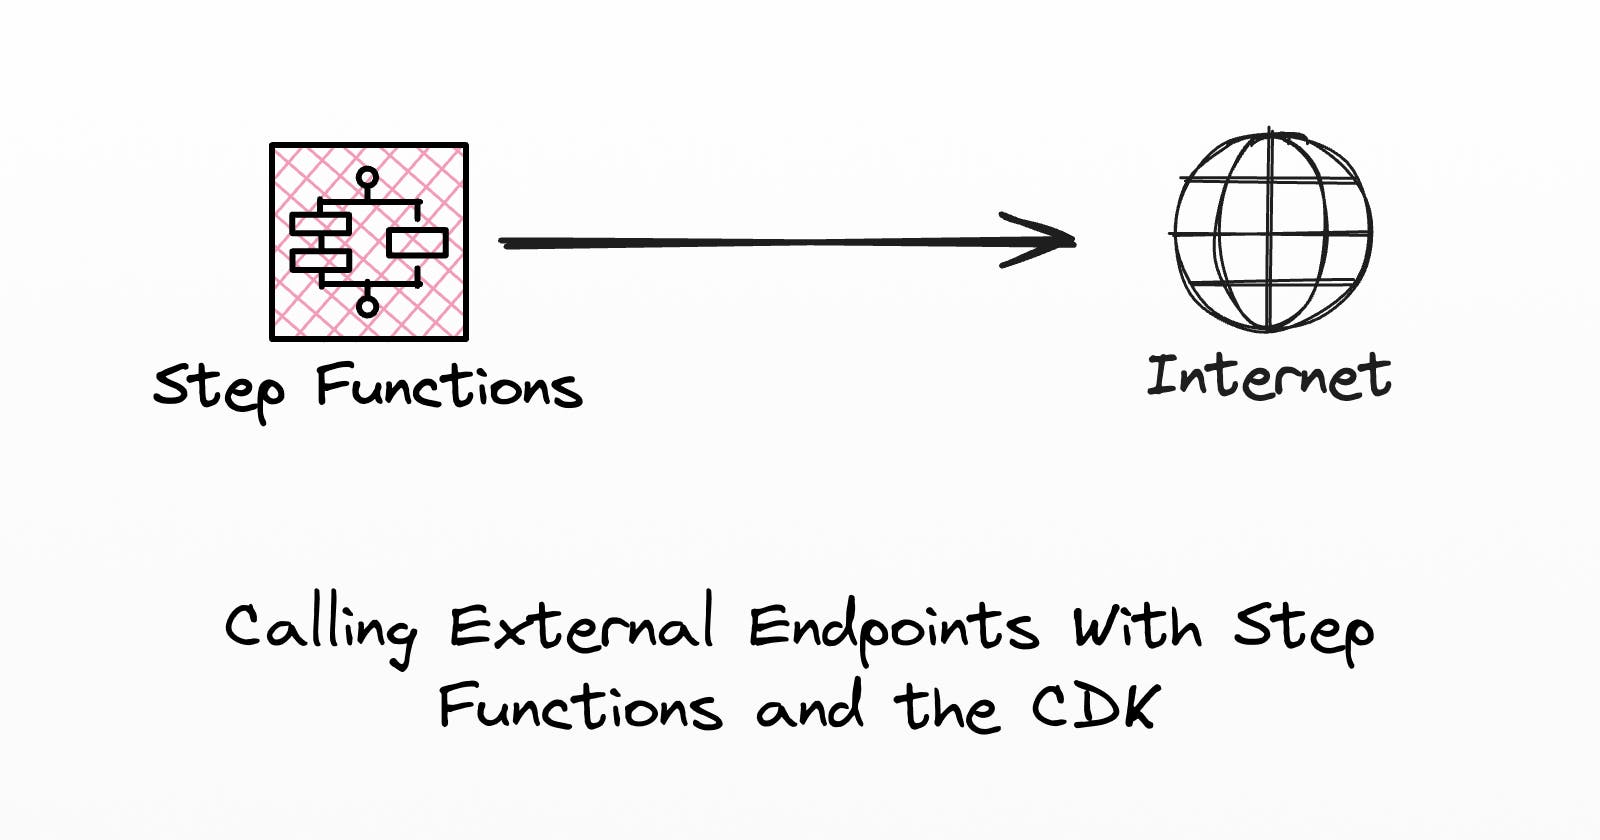 Calling External Endpoints With Step Functions and the CDK